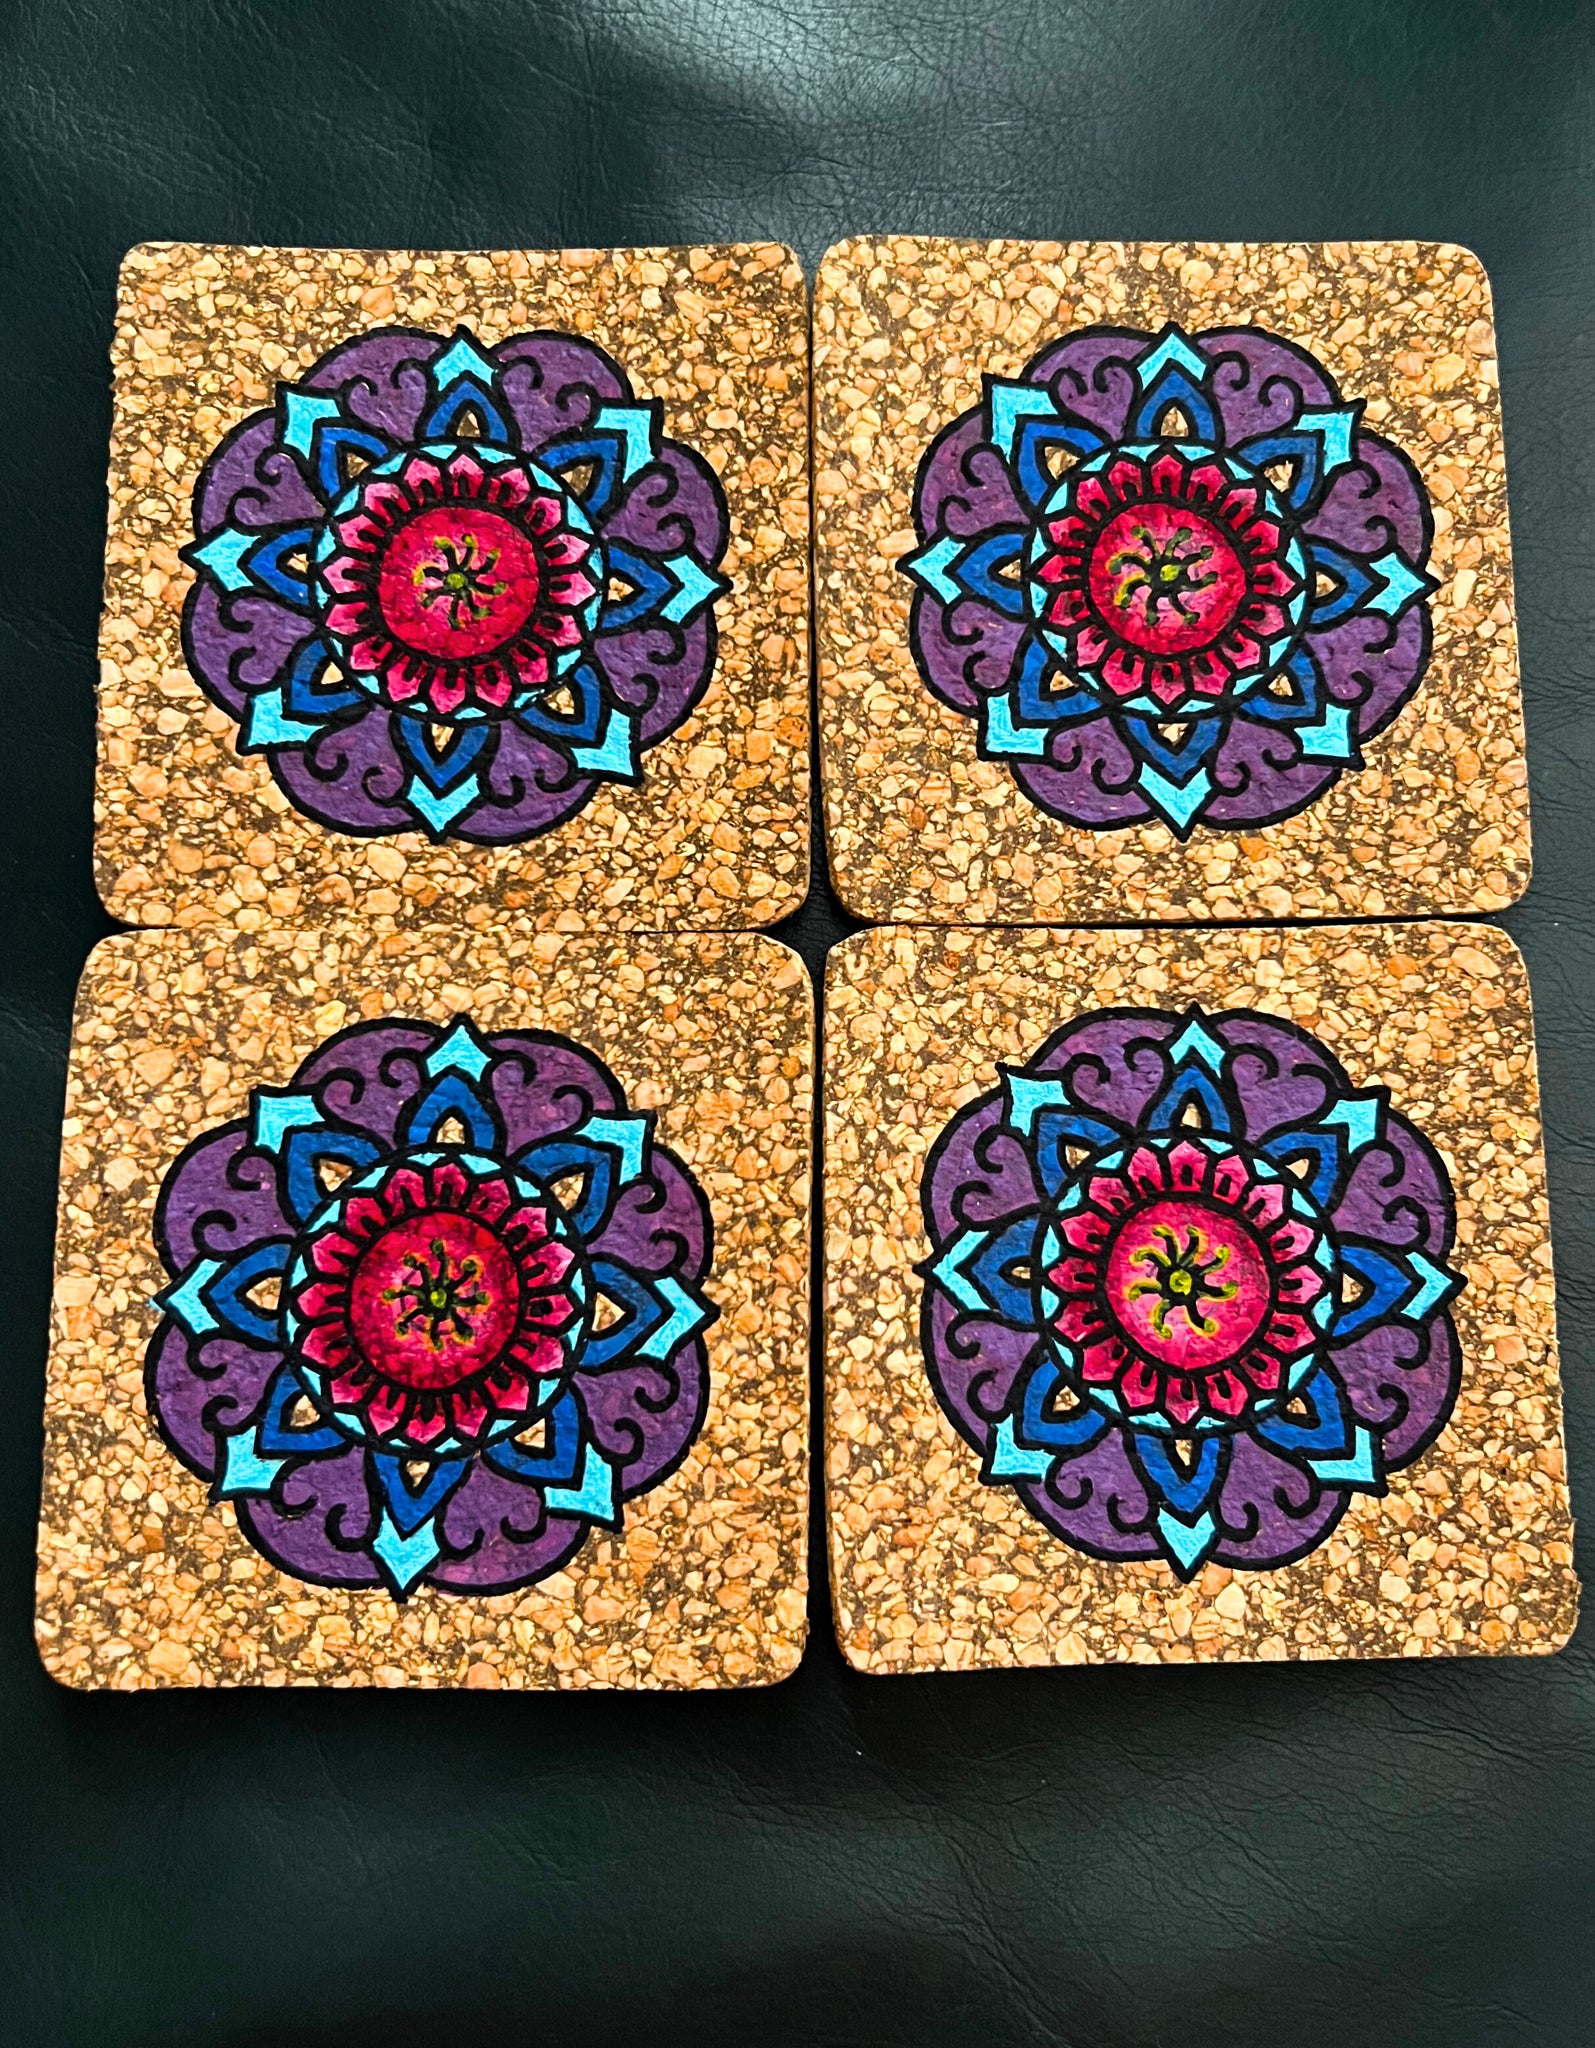 HAND PAINTED NATURAL CORK COASTERS HANDCRAFTED SET OF 4 CUSTOMIZED GIFT